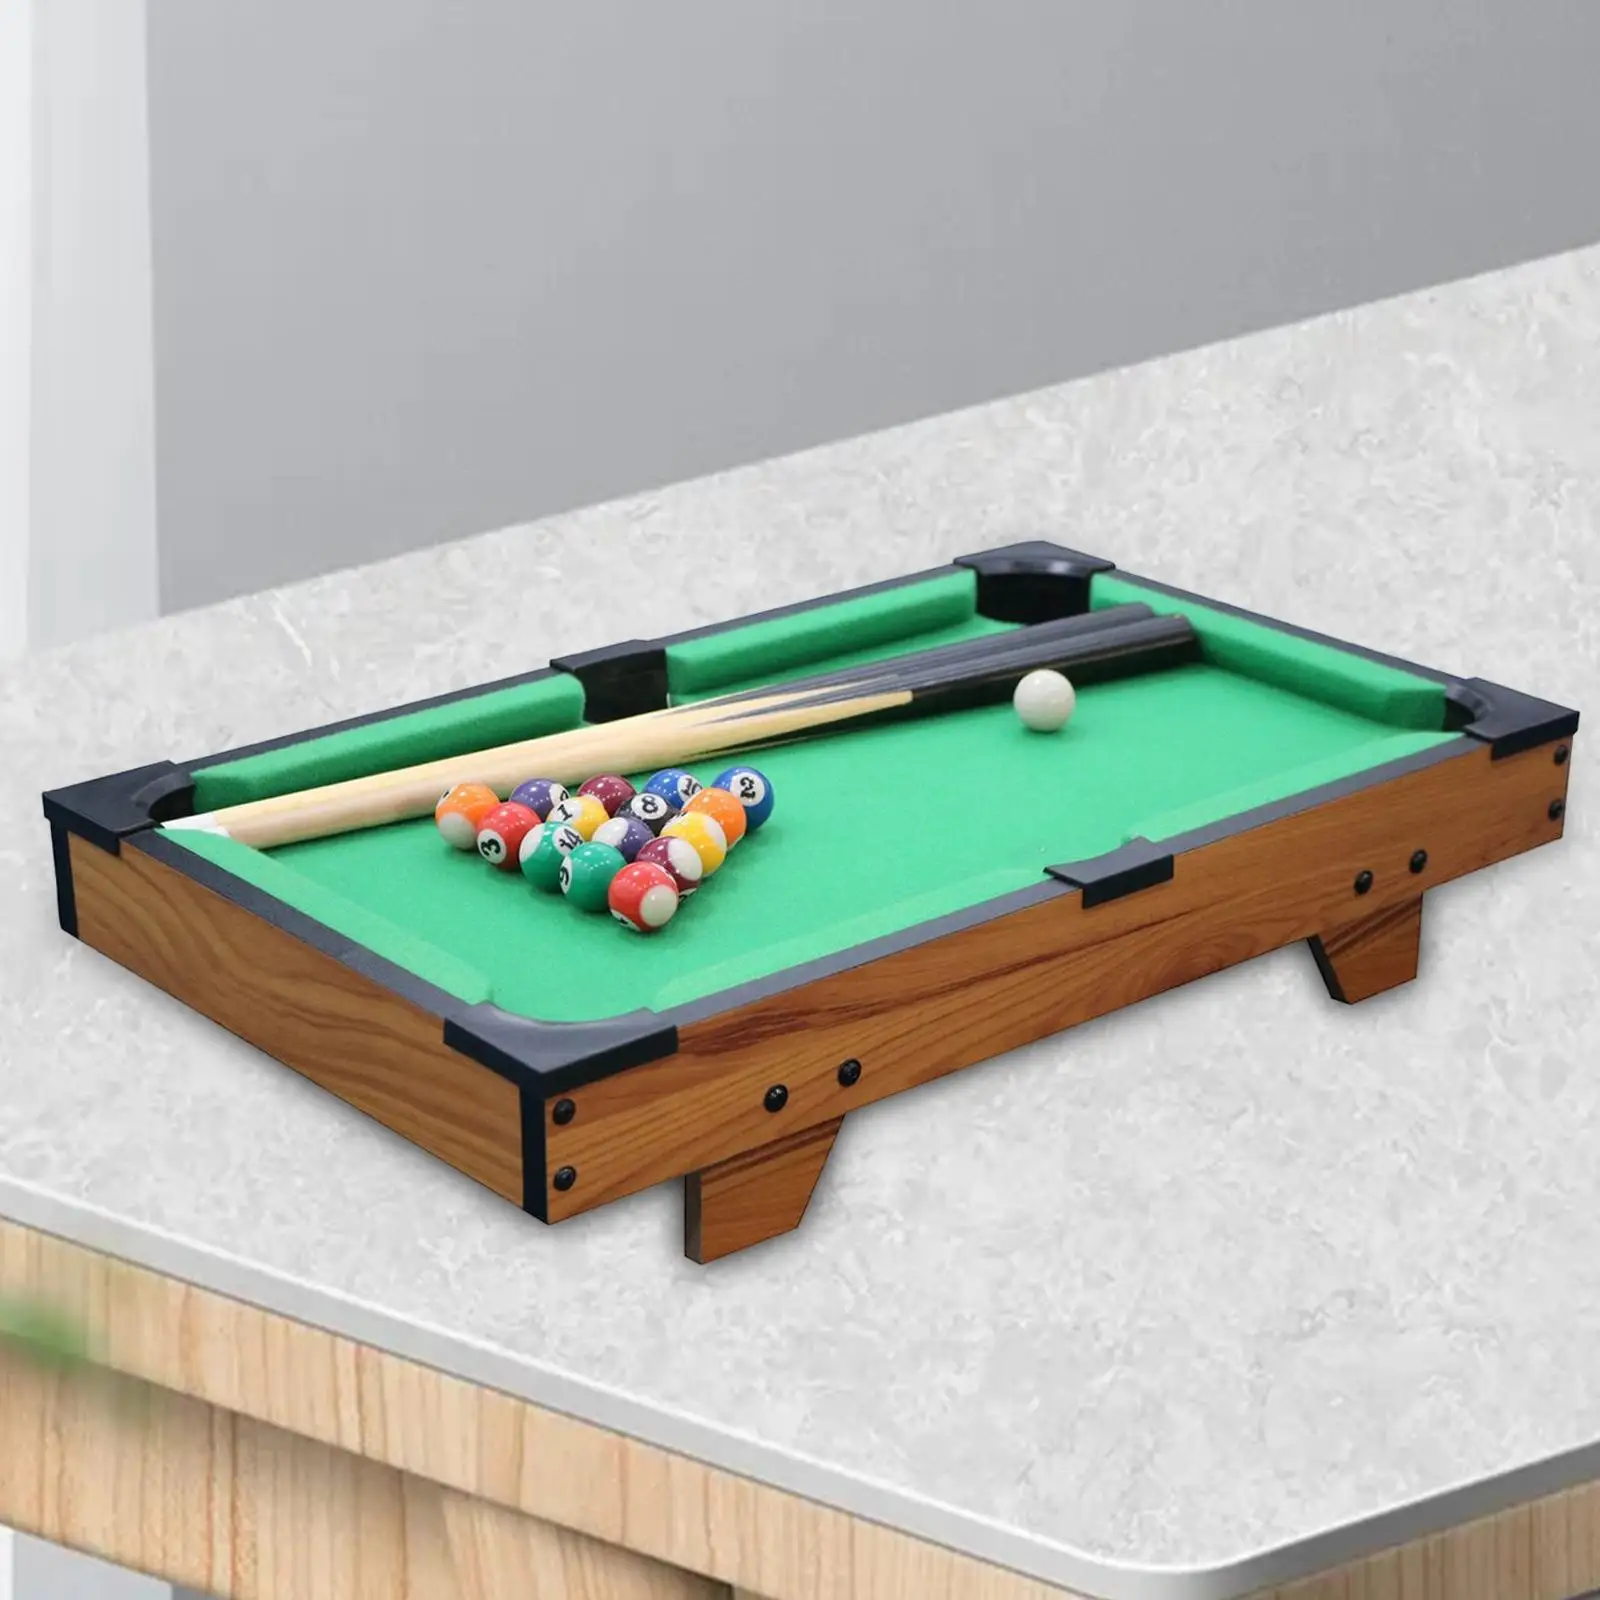 Portable Mini Table pool Educational with 2 Sticks Play Cues Felt Surface Snooker Toy for Entertainment Sports Dorm Travel